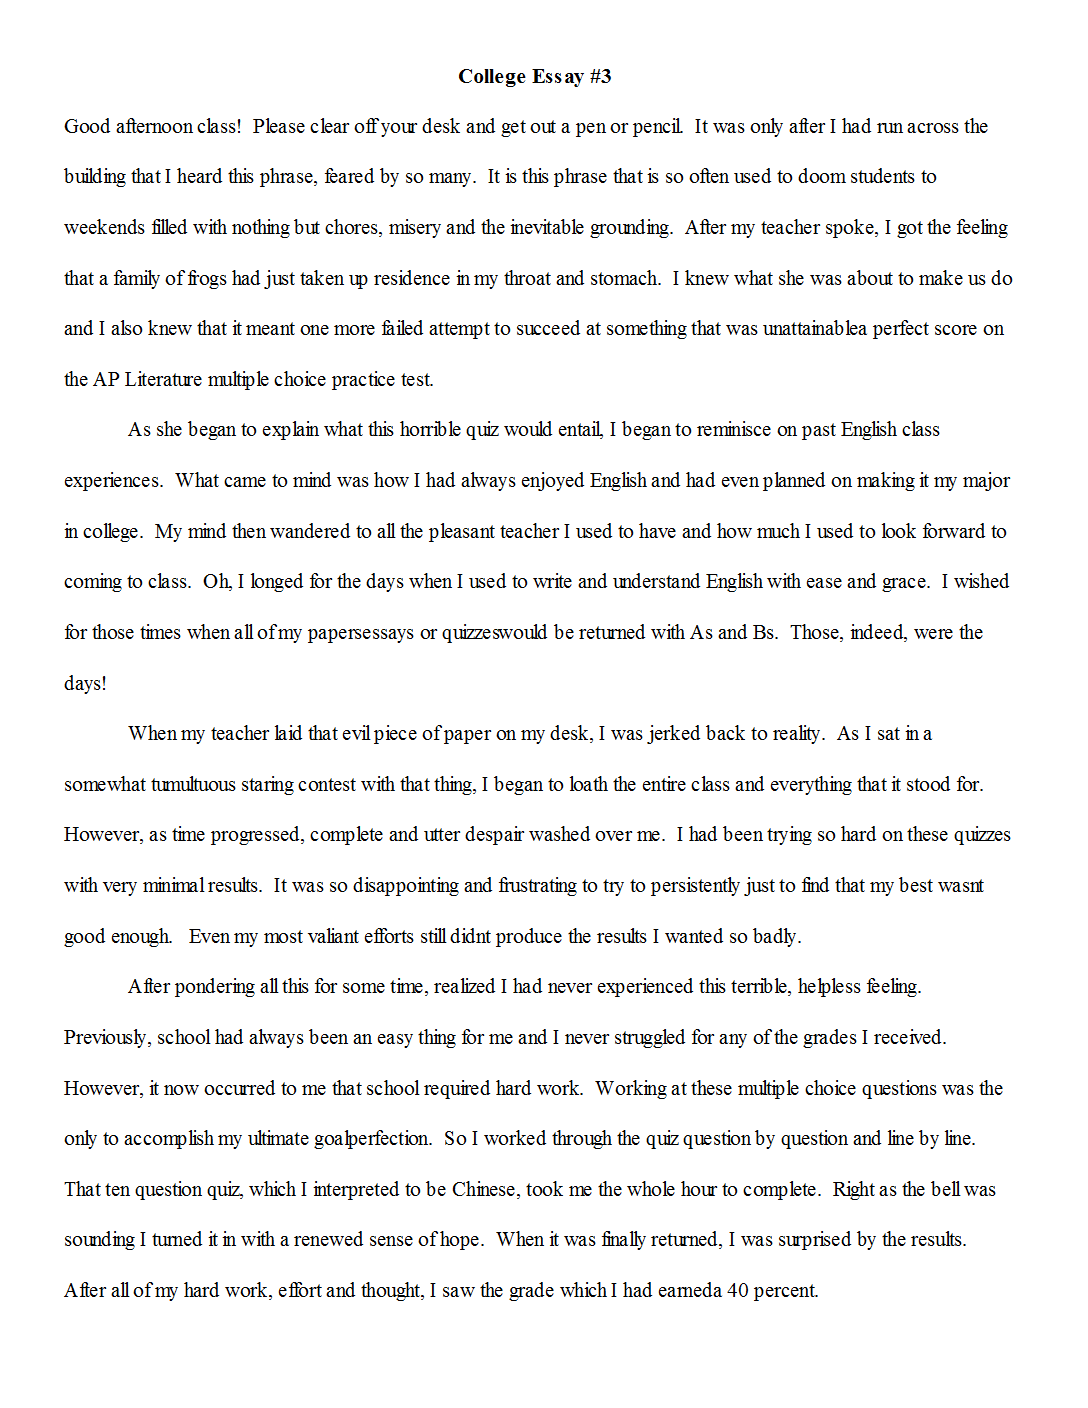 example of narrative essay about experience